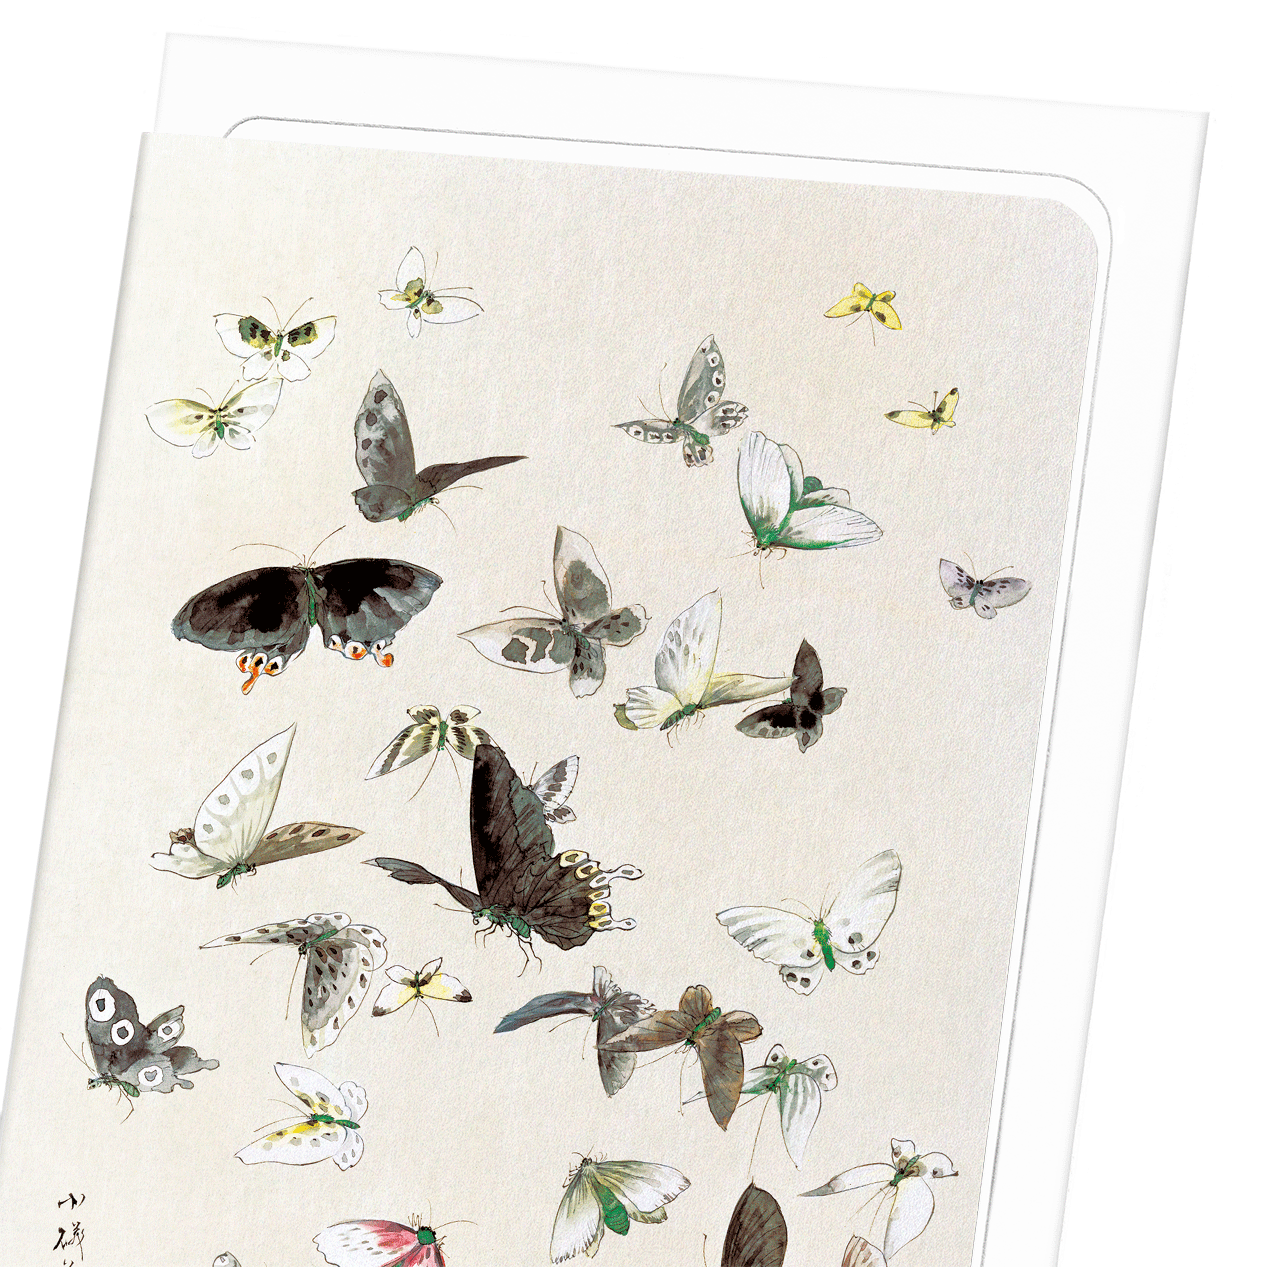 BUTTERLFLIES AND MOTHS (1830-1850): Japanese Greeting Card